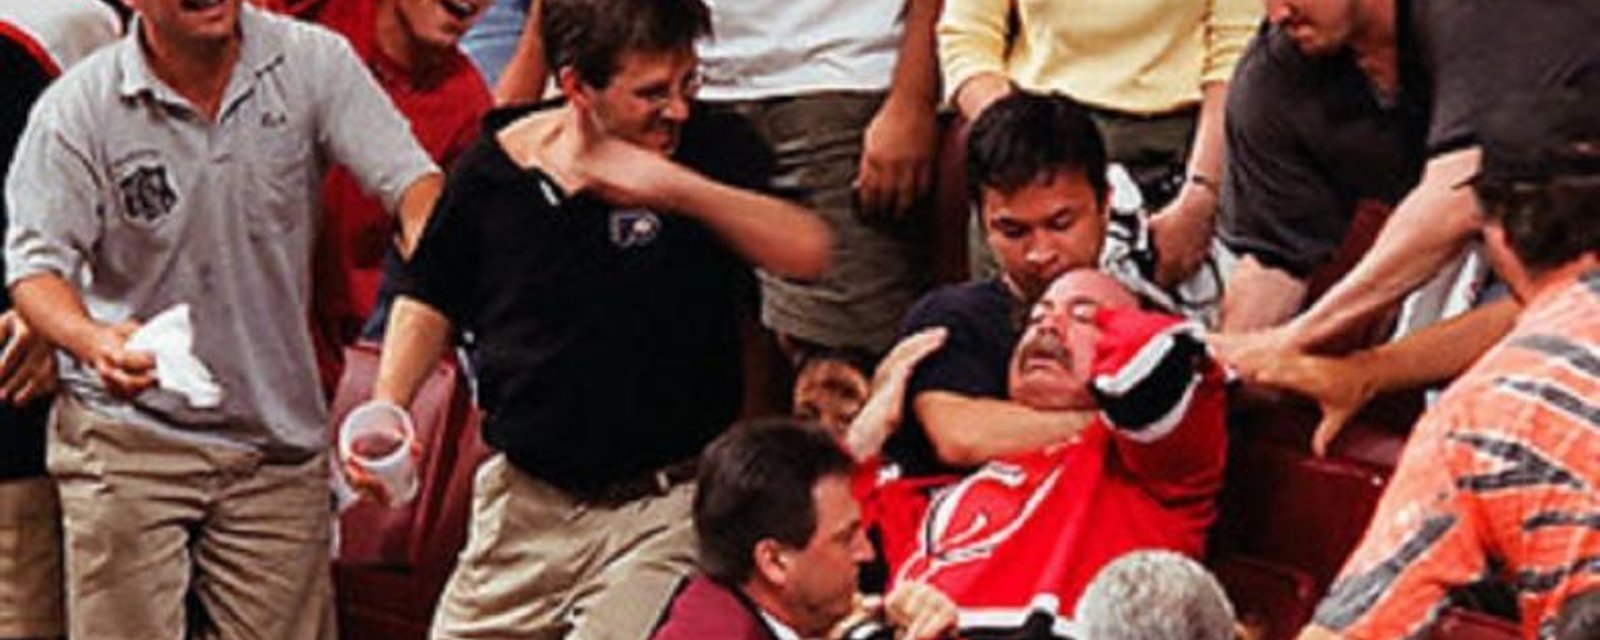 Hockey 'fan' stabs and kills a rival supporter over team loyalty.